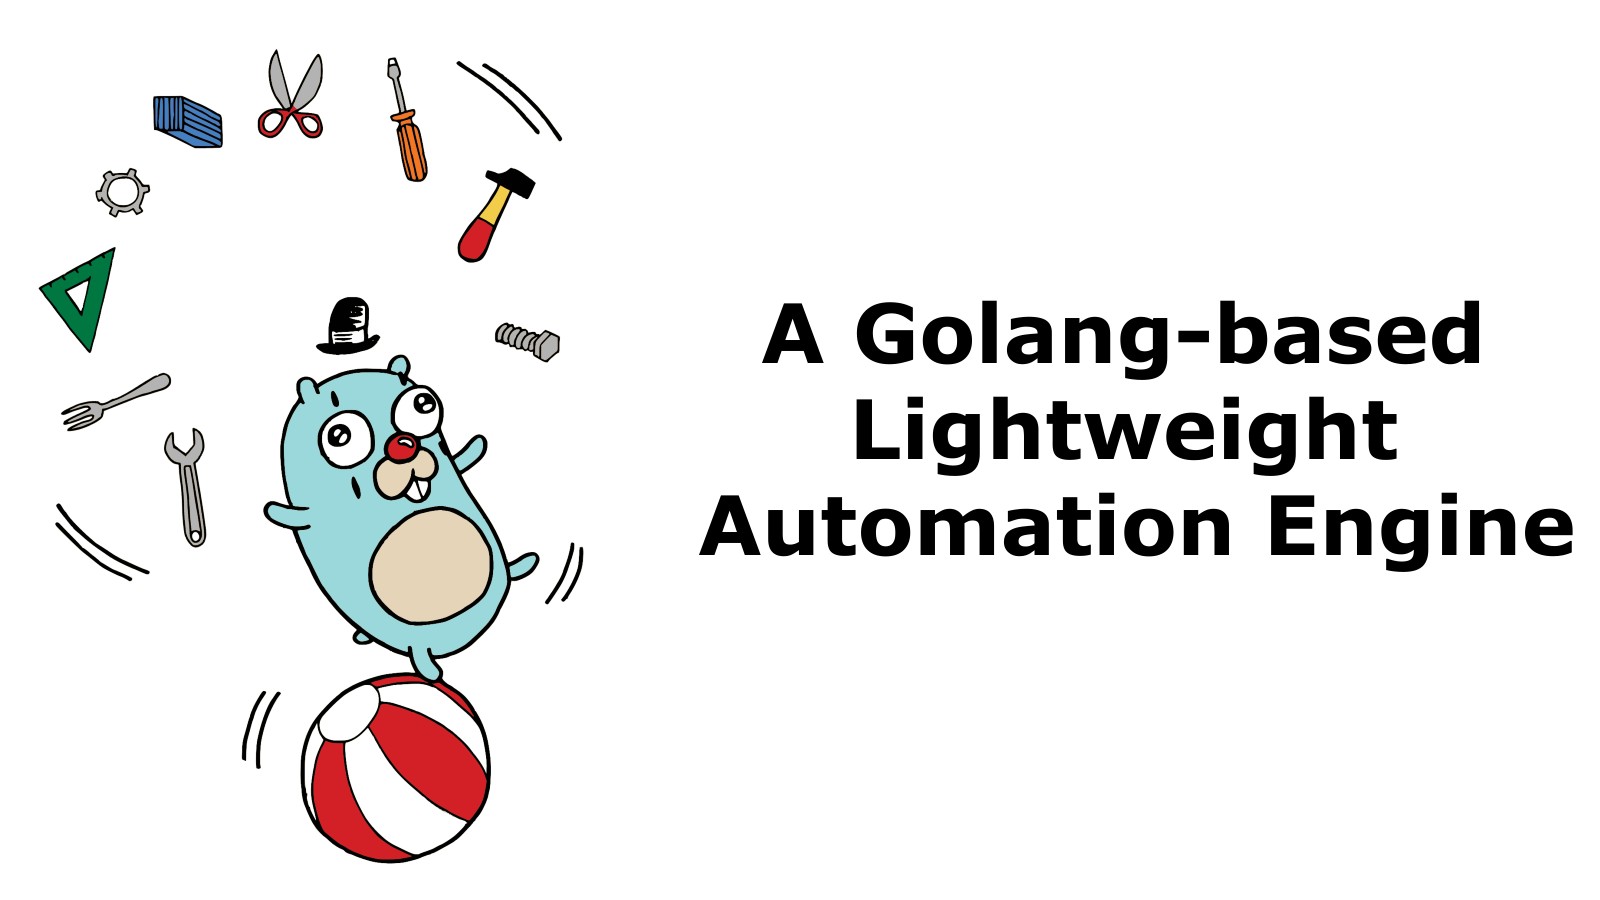 A Golang-based Lightweight Automation Engine